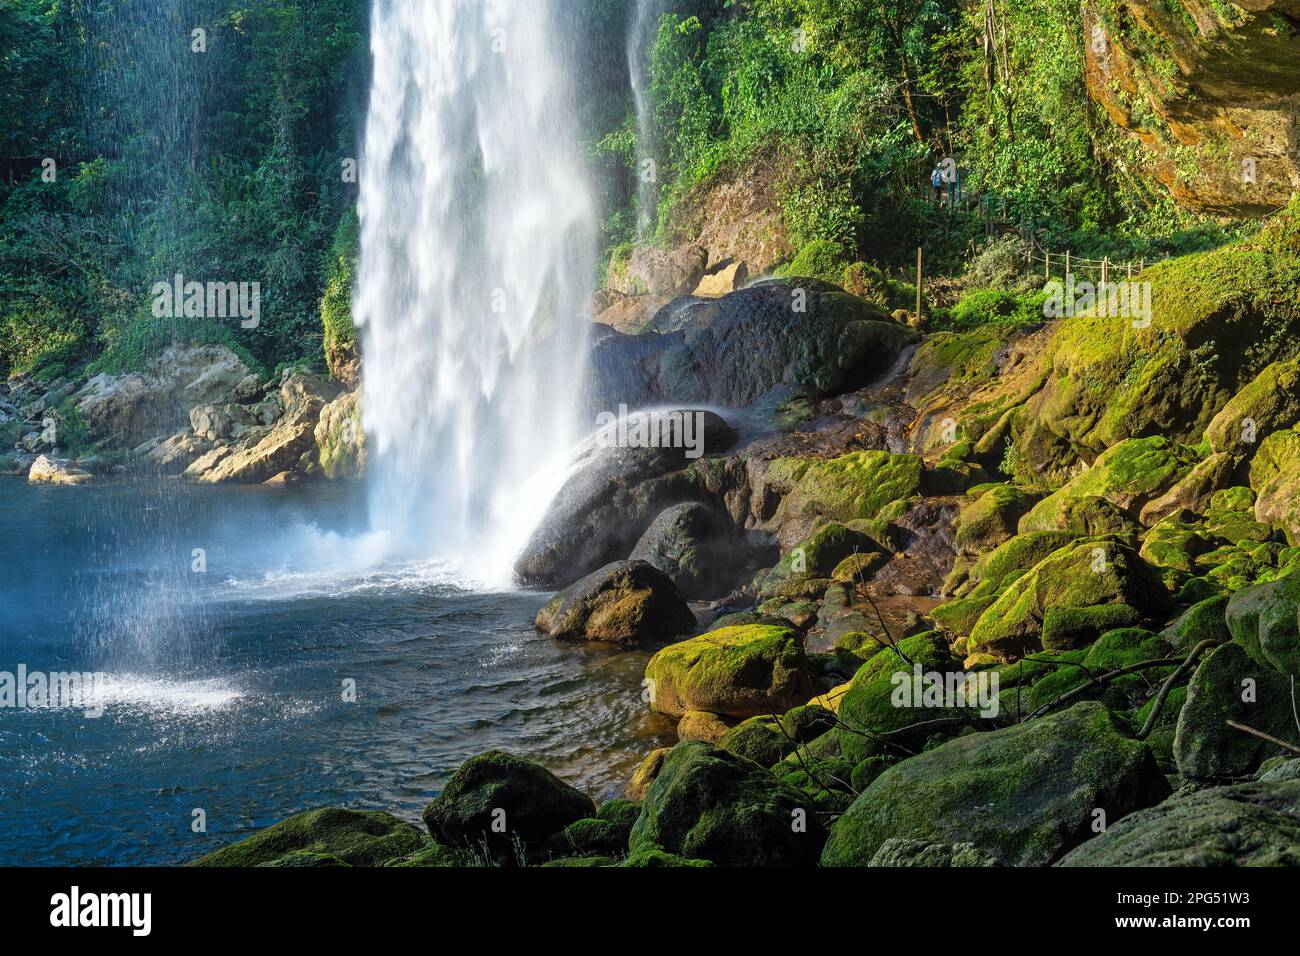 Misol Ha waterfall at sunset seen from behind, Palenque, Chiapas, Mexico. Stock Photo